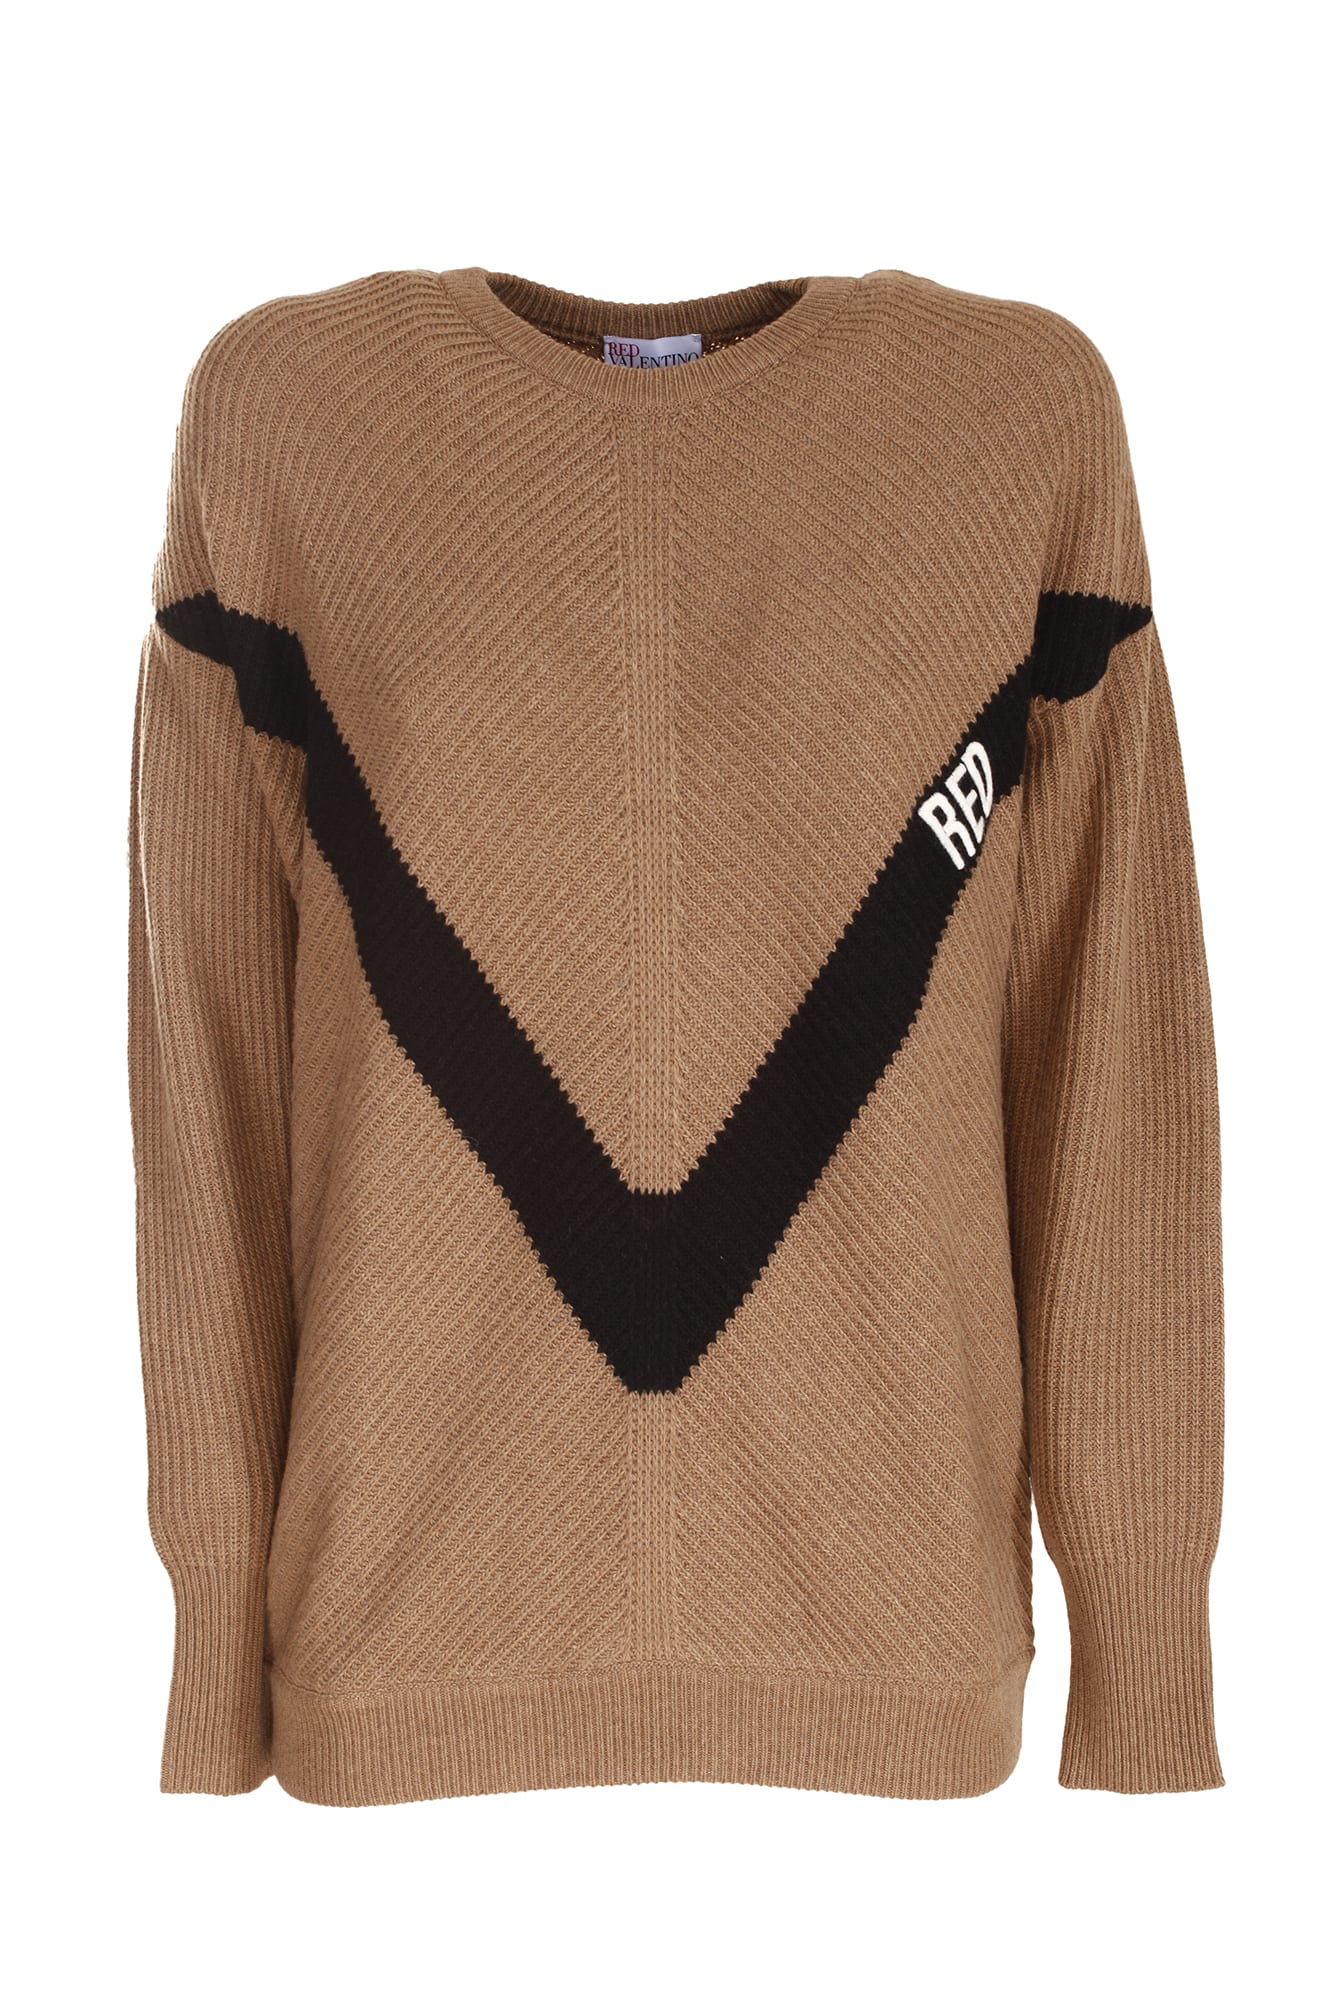 Red Valentino carded wool blend sweater